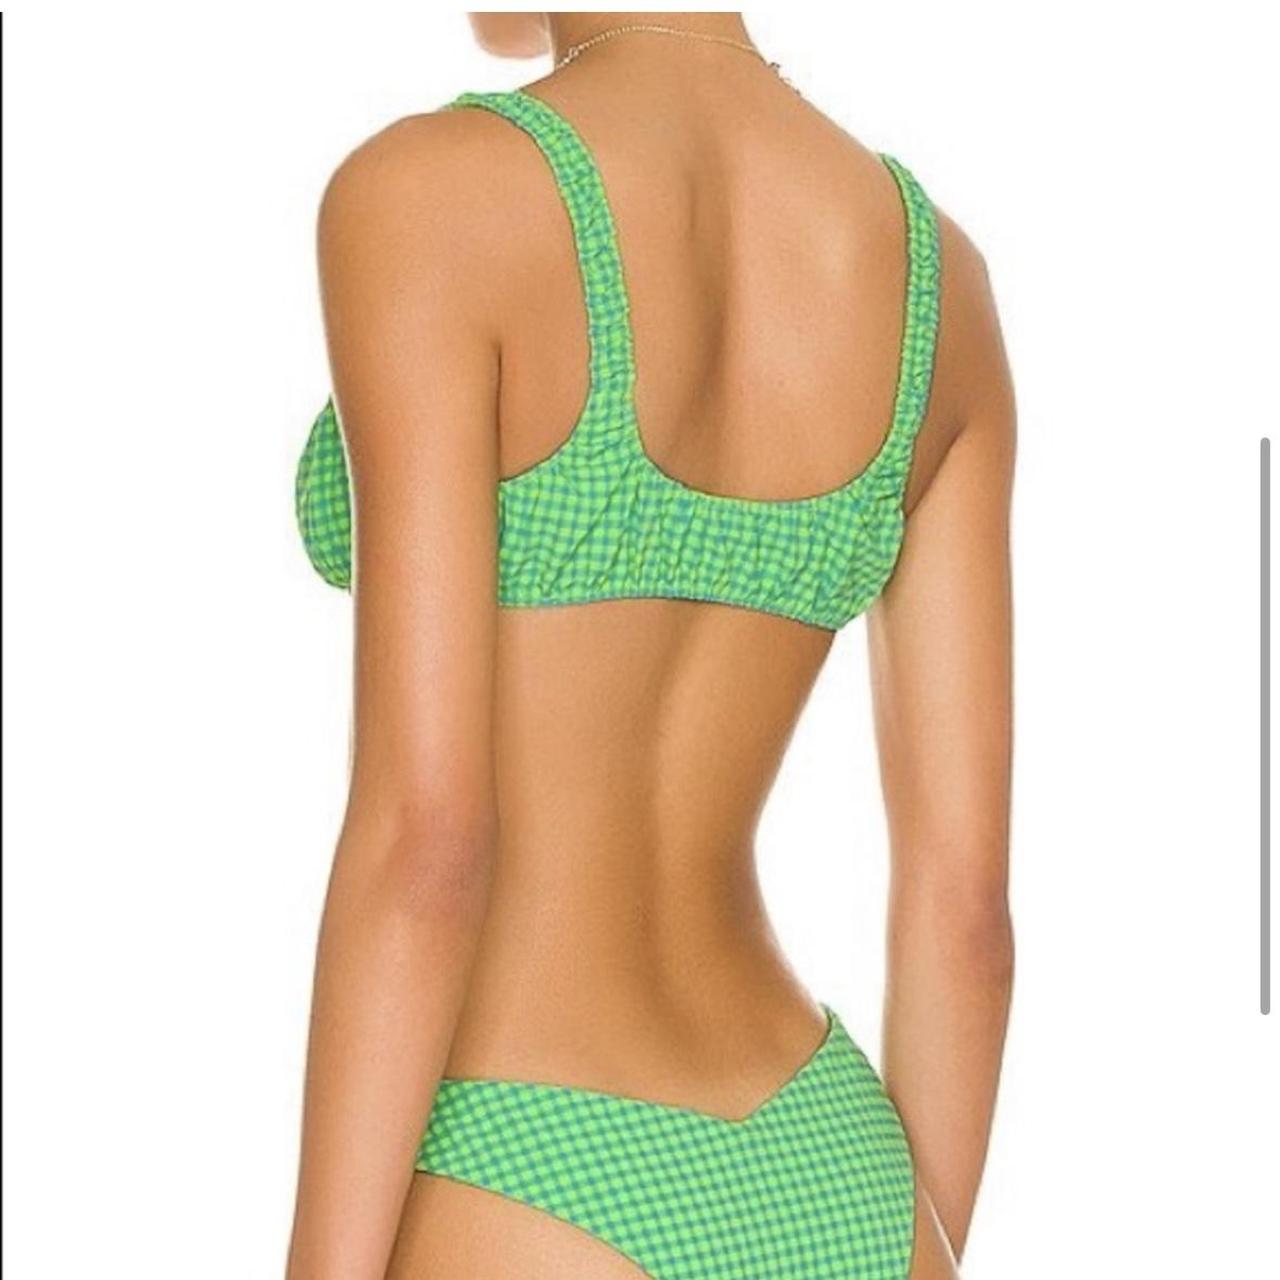 We Wore What Men's Green and Blue Bikinis-and-tankini-sets (7)